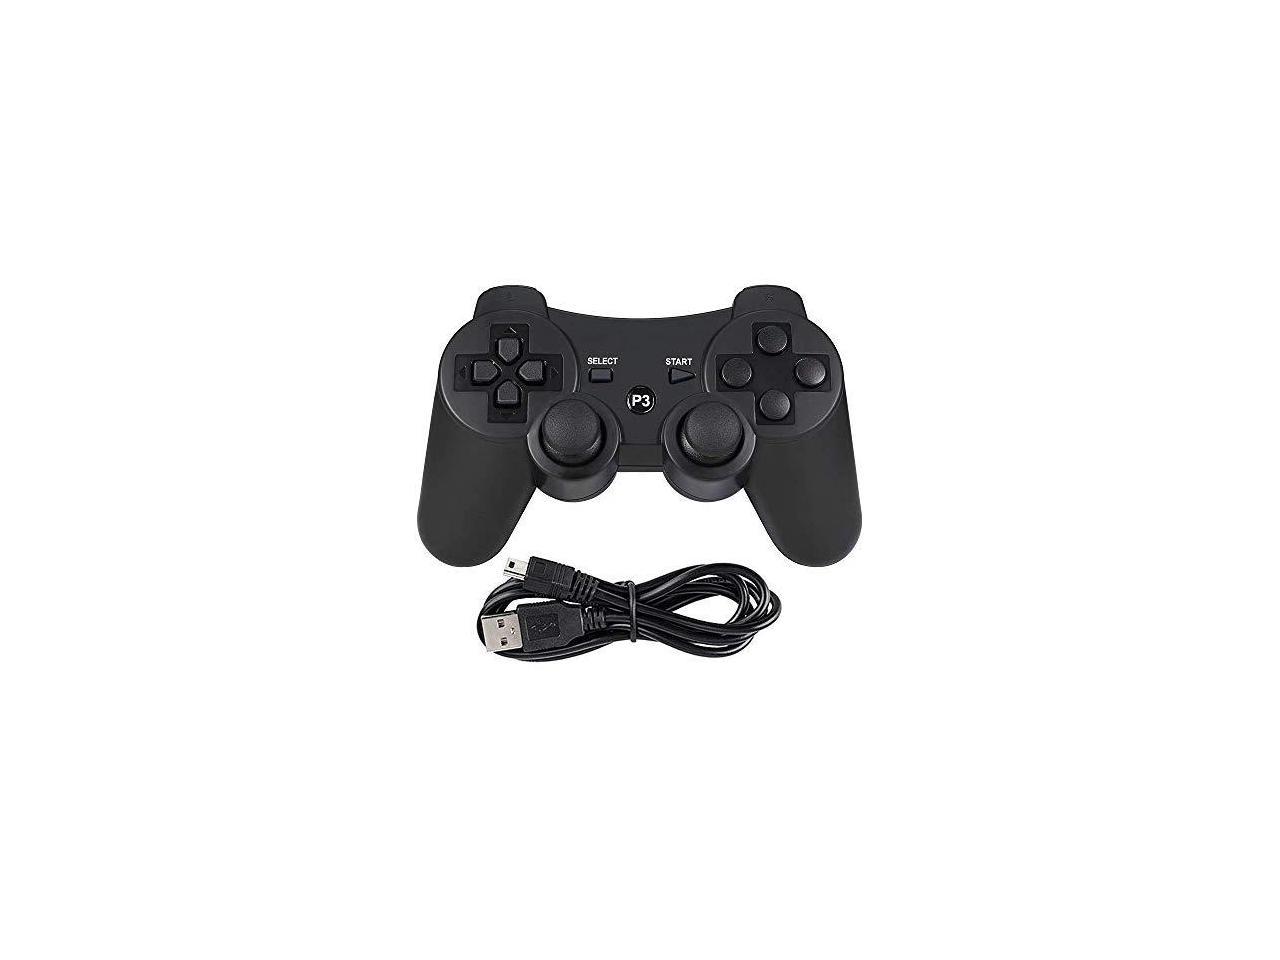 PS3 Controller WirelessBluetooth Dualshock3 Sixaxis Gamepad Joystick with USB Charger Cable Cord Remote Game Accessories for PlayStation3 and PC